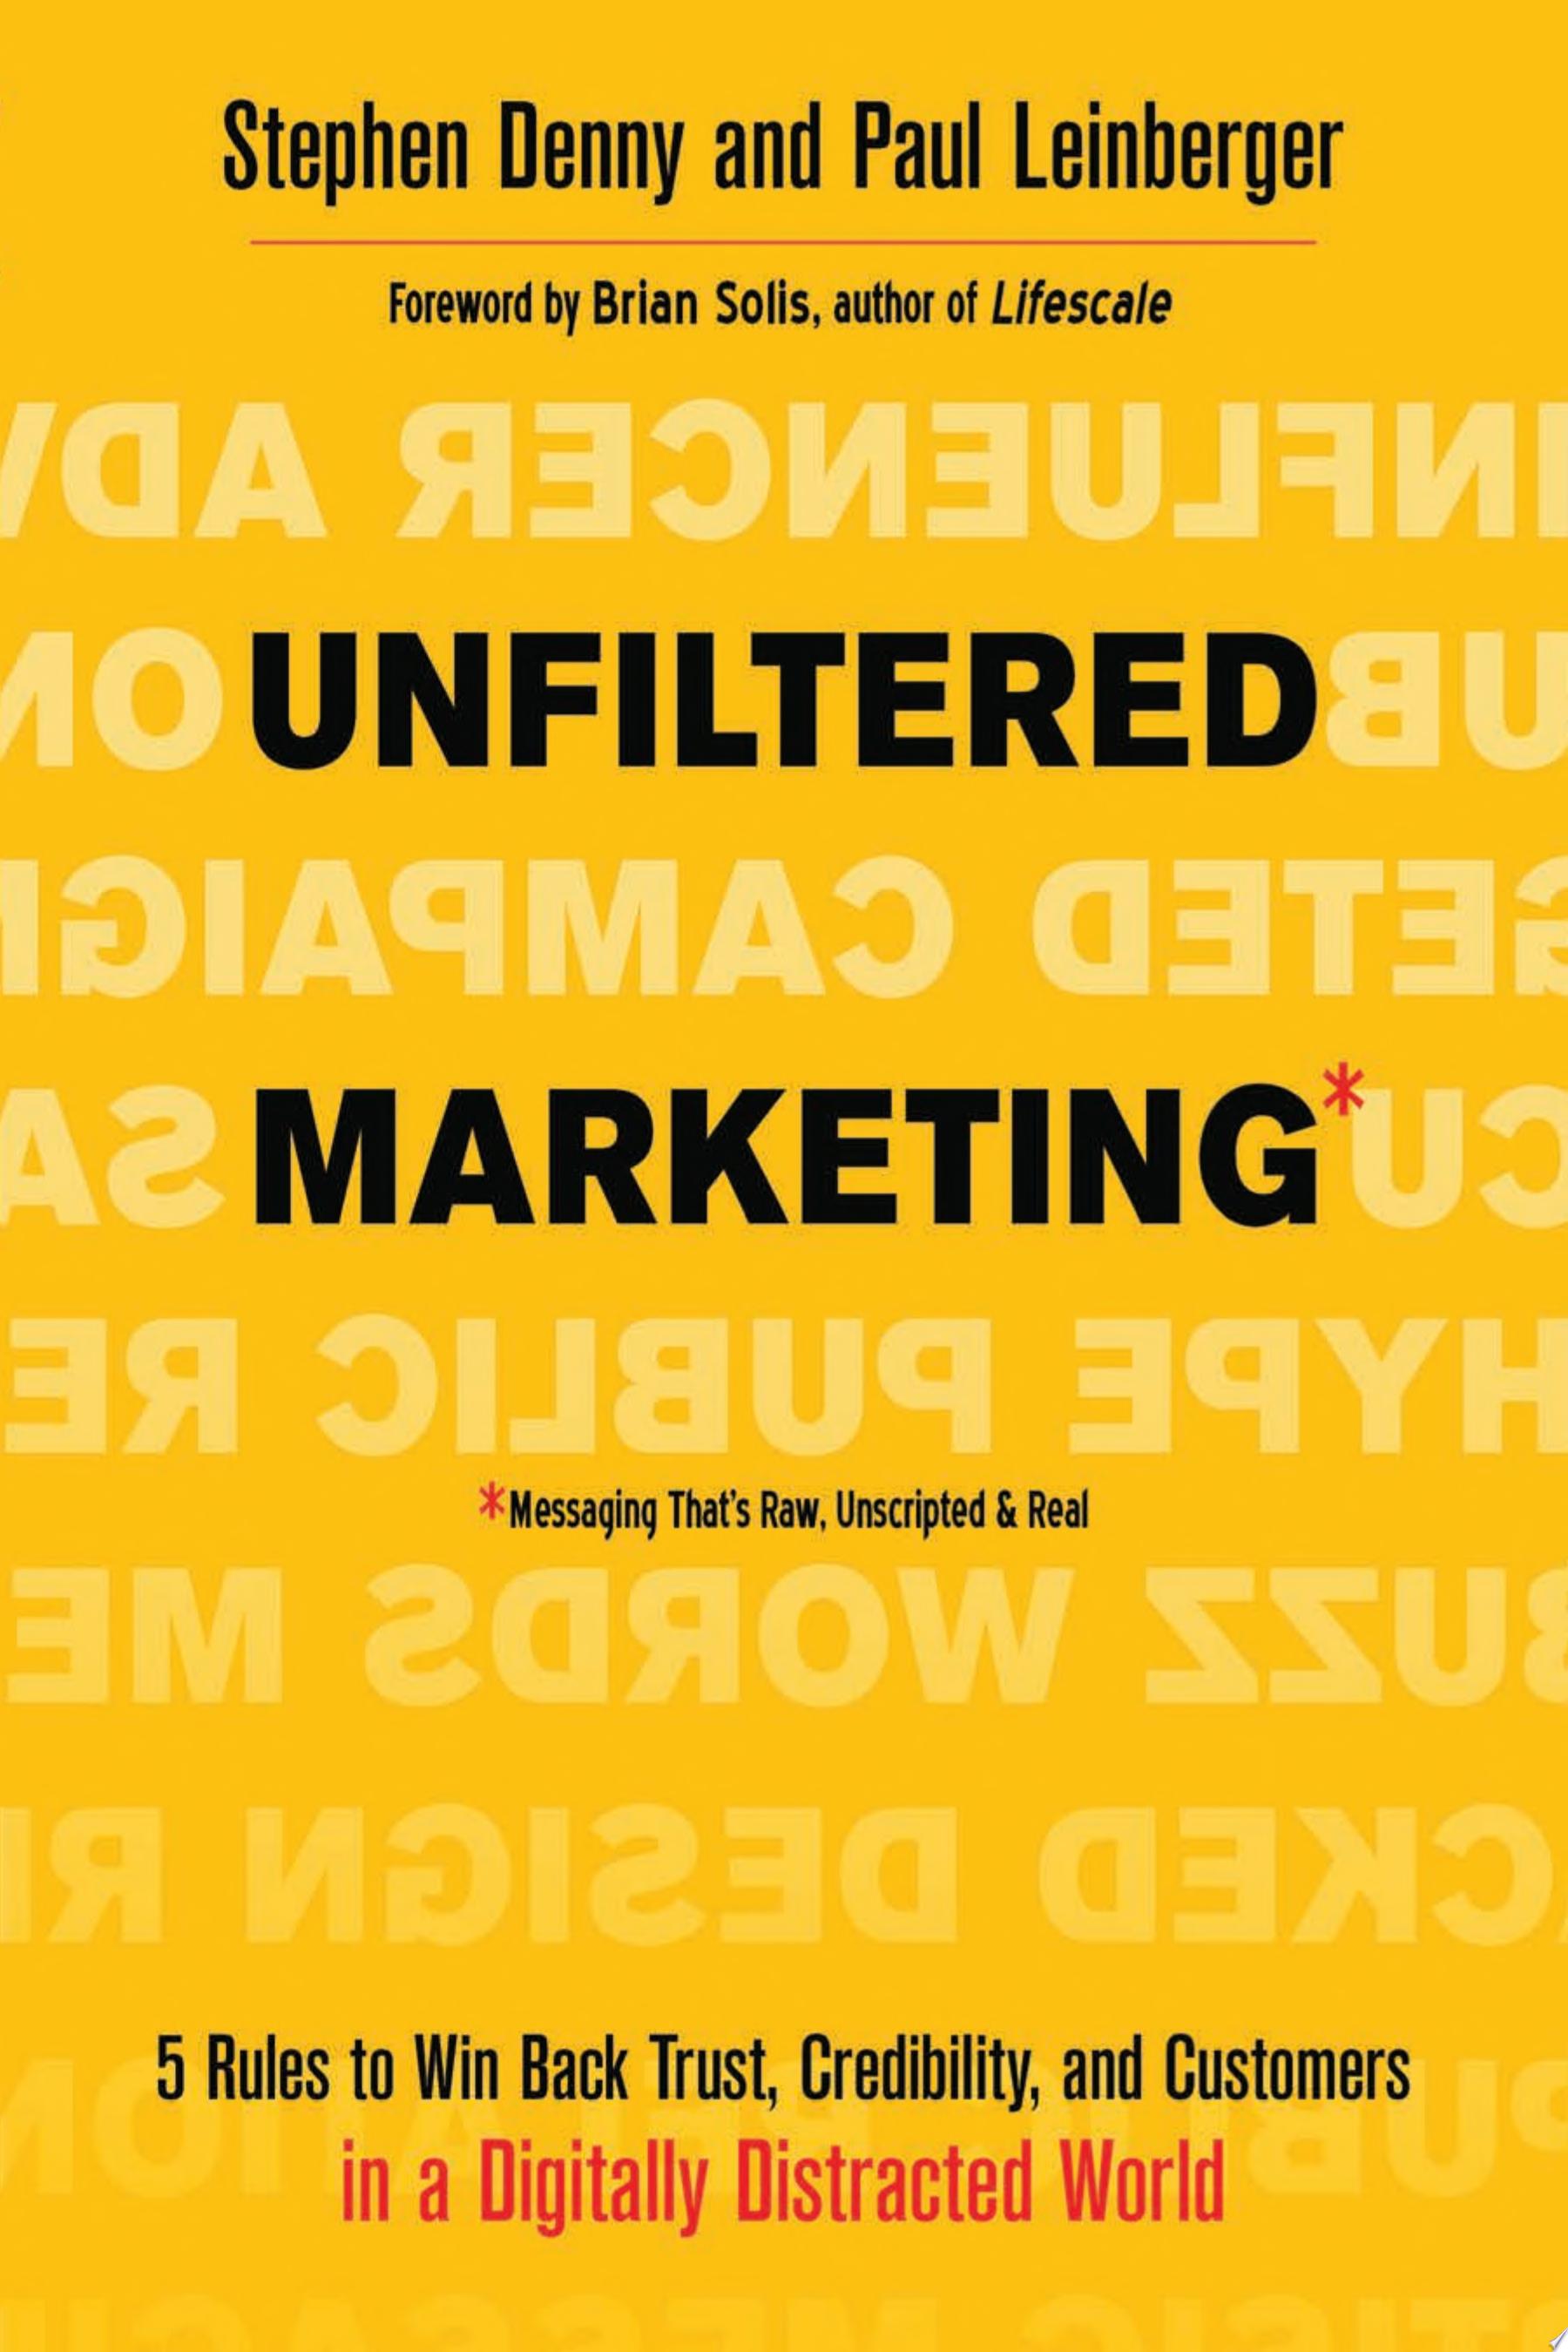 Image for "Unfiltered Marketing"